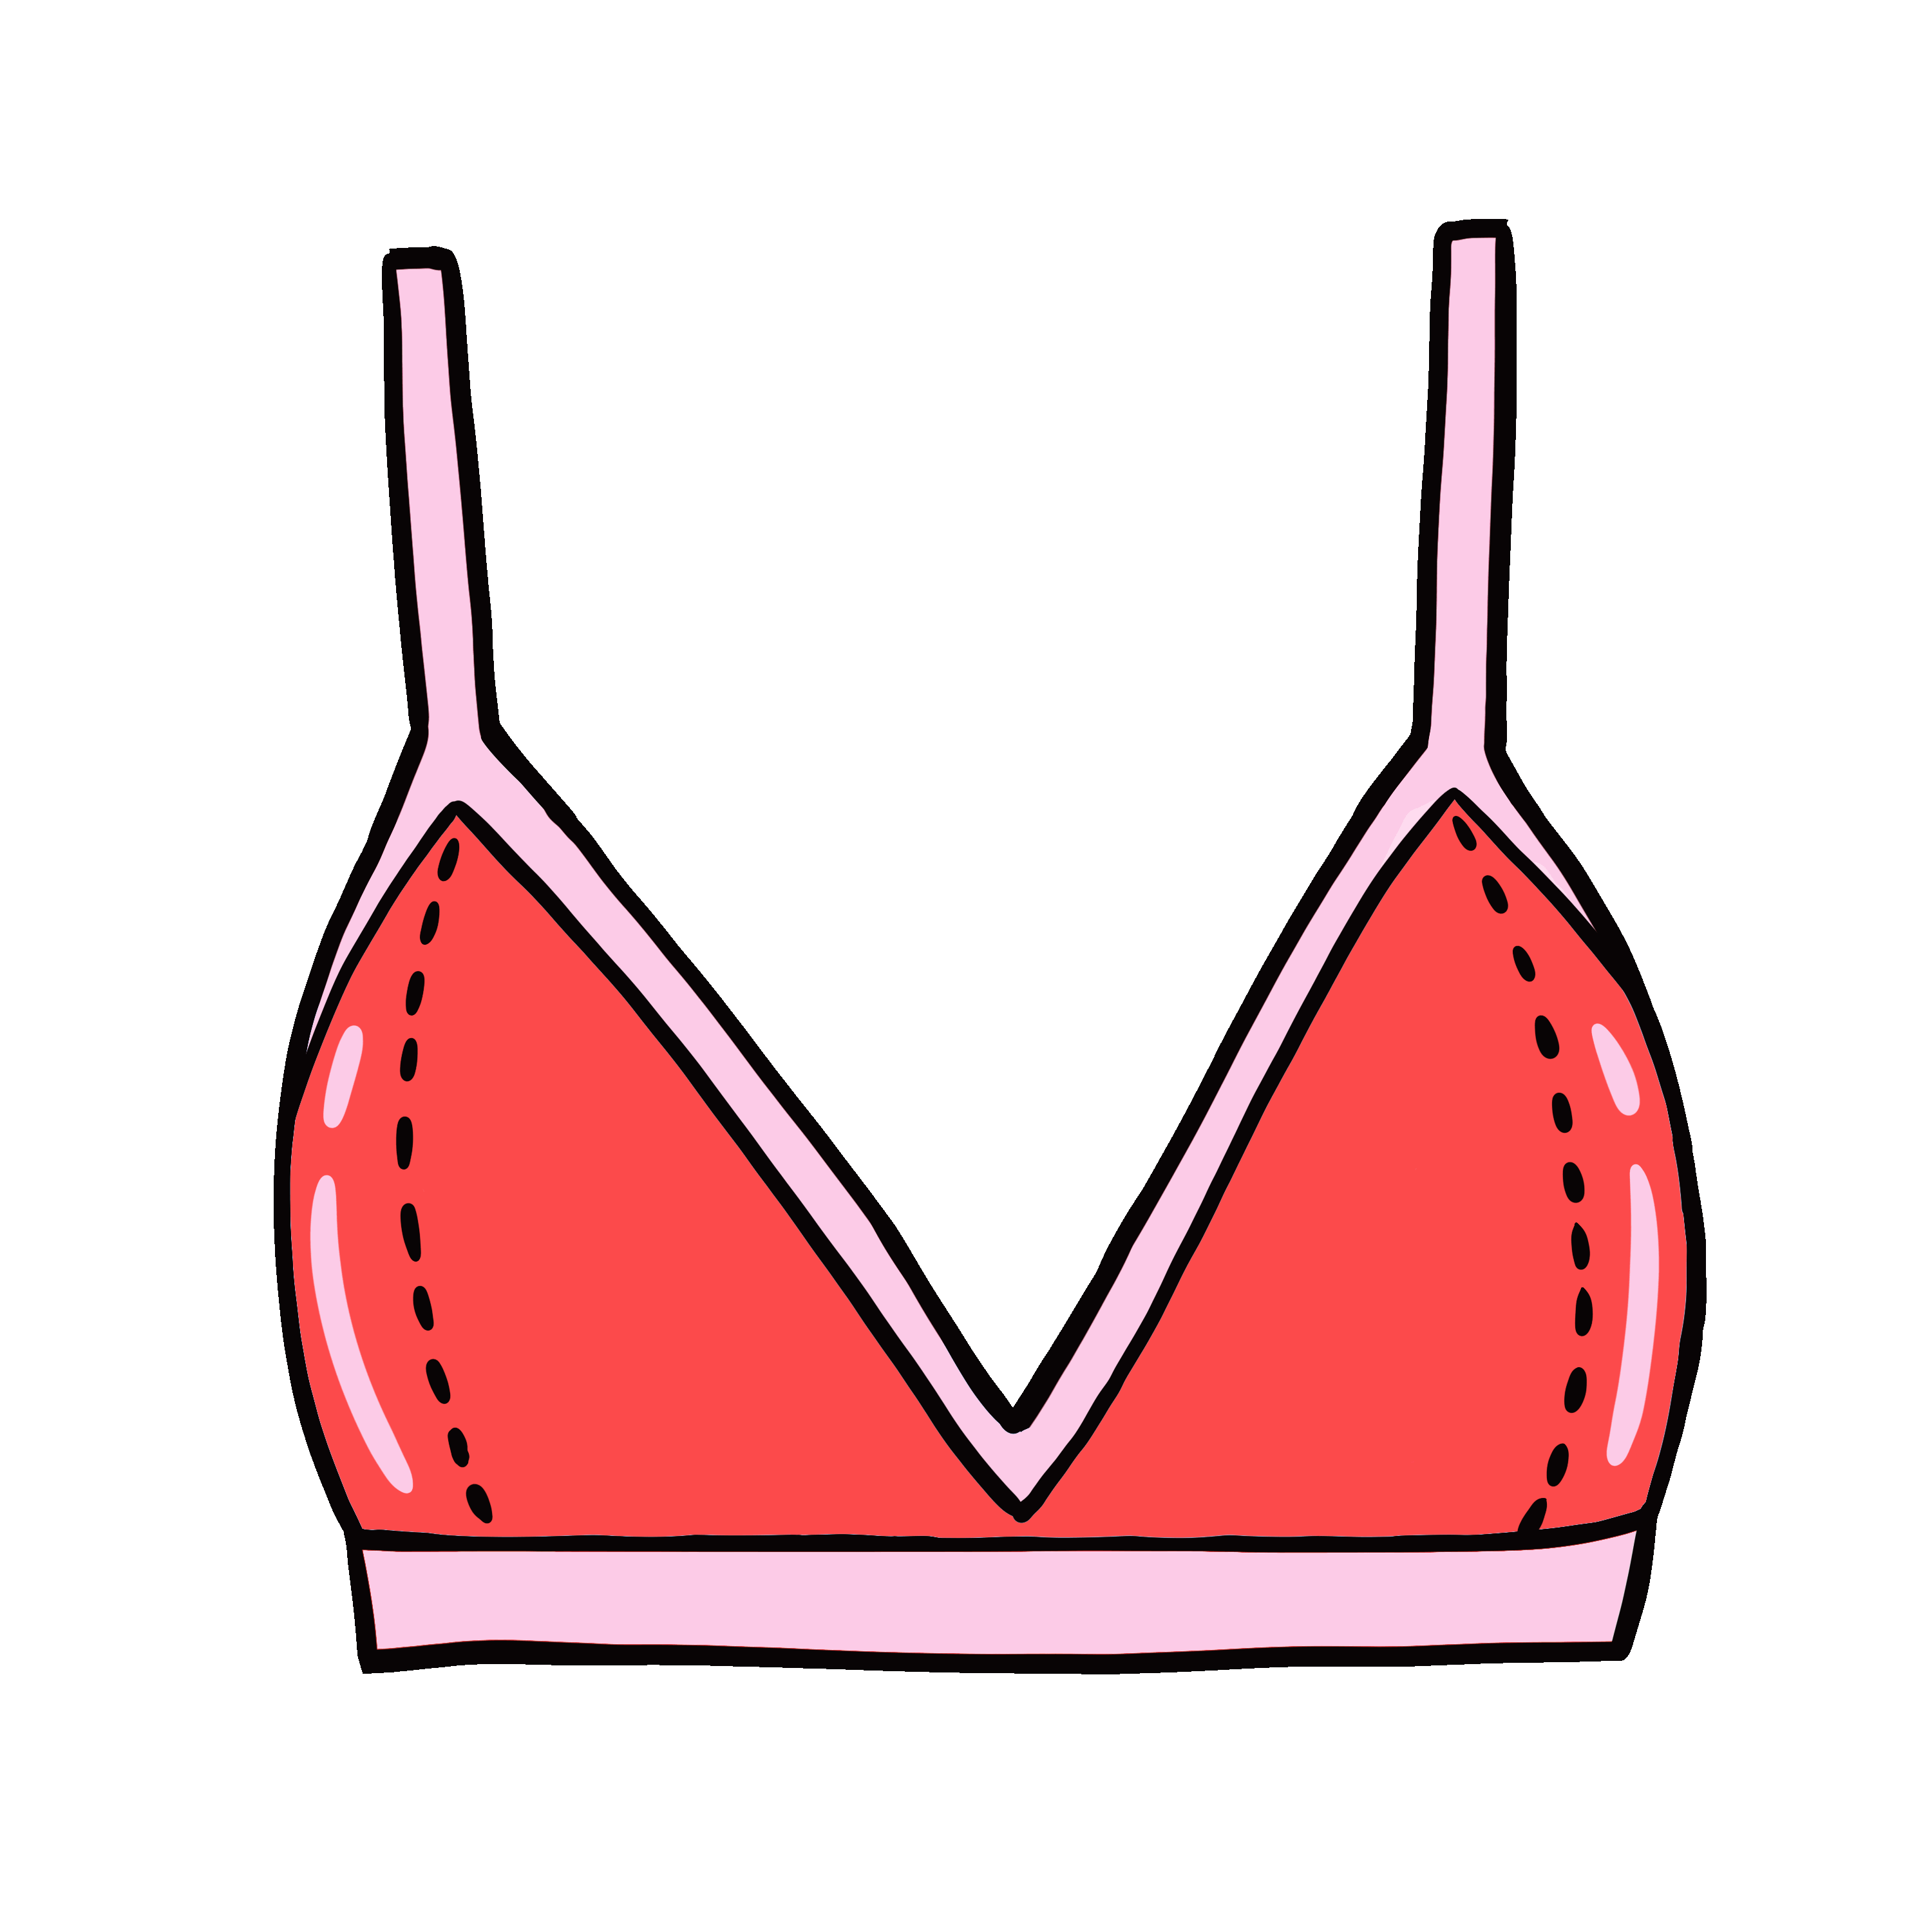 Underwear Bra Sticker by Sophie Rose Brampton for iOS & Android | GIPHY